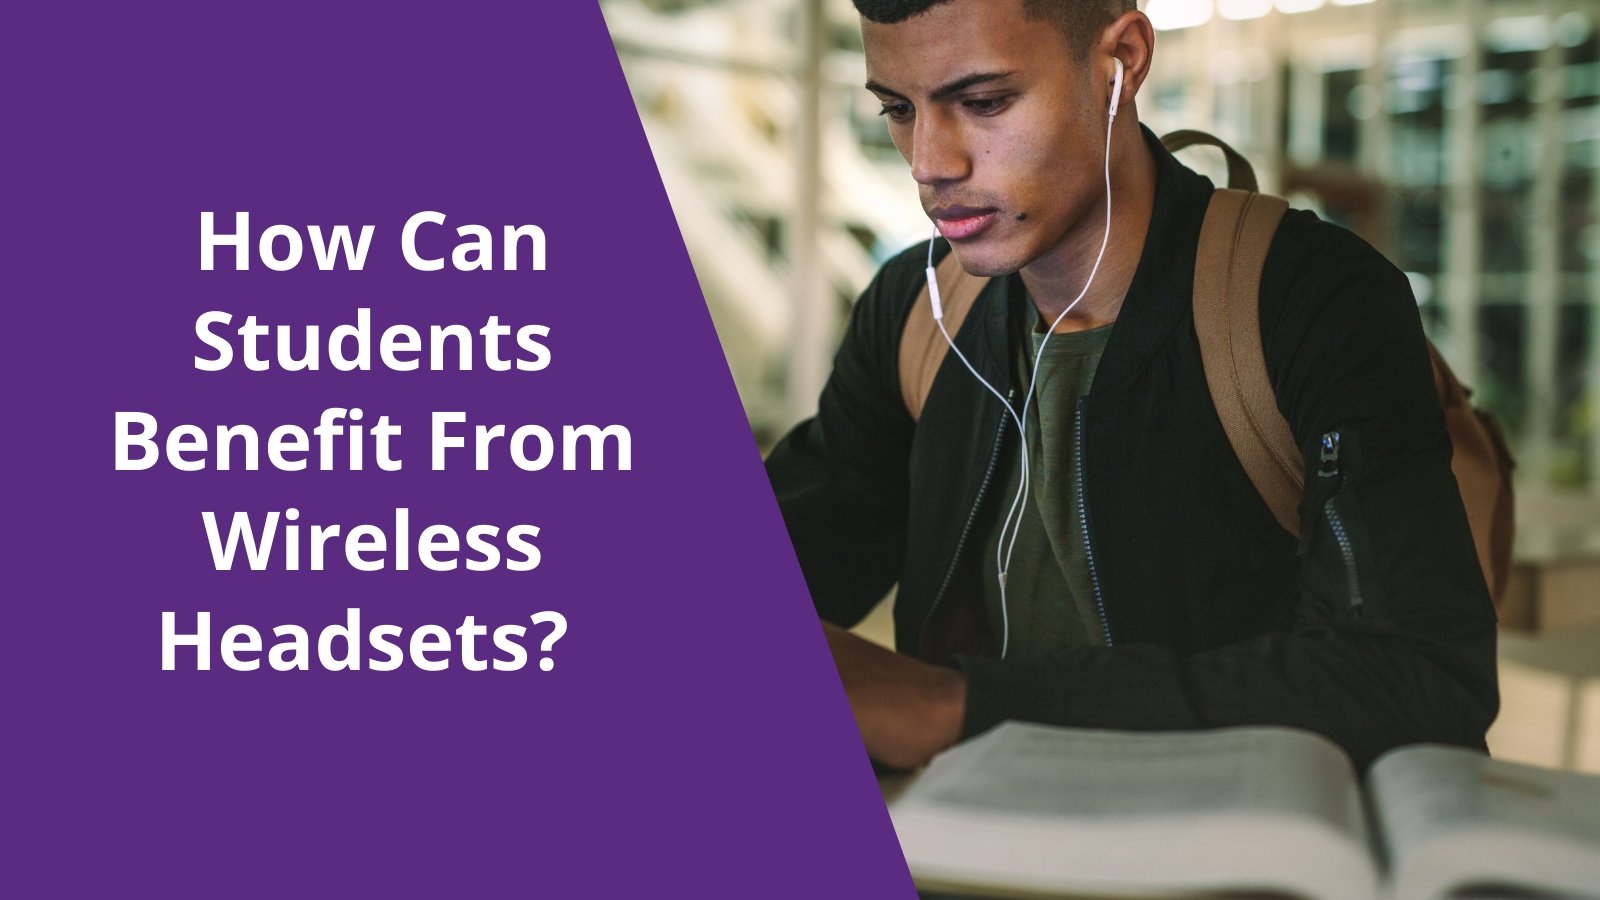 How Can Students Benefit From Wireless Headsets? - Headset Advisor